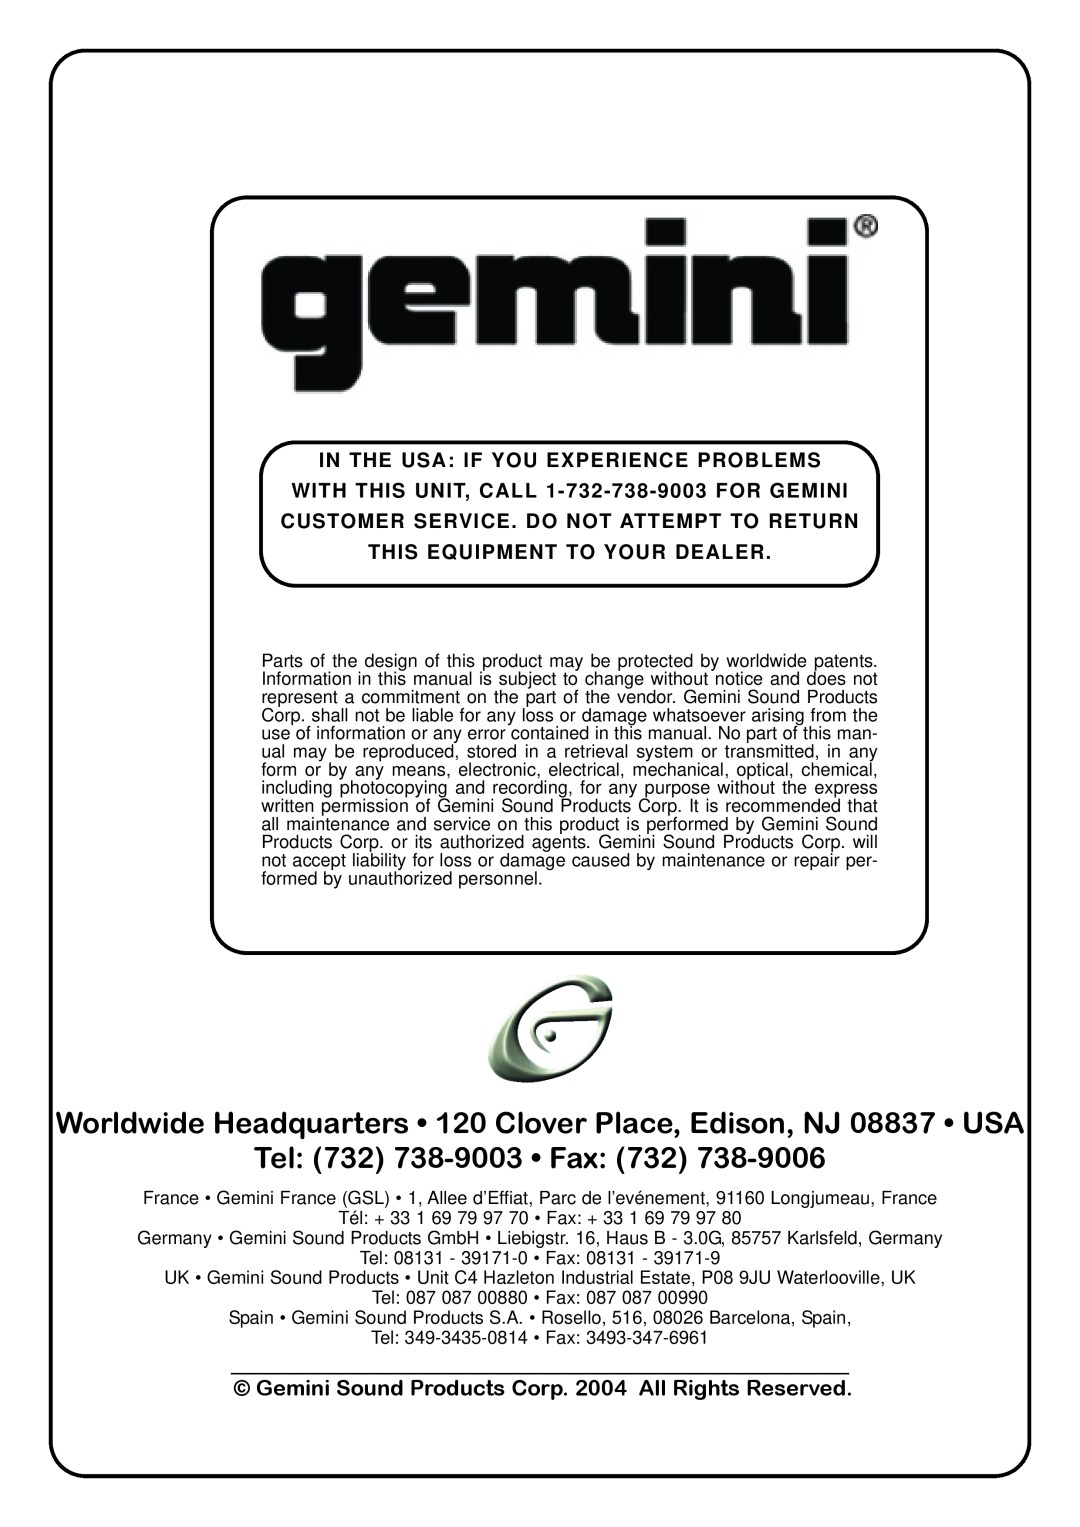 Gemini CDX-01 Tel 732 738-9003 Fax, In The Usa If You Experience Problems, WITH THIS UNIT, CALL 1-732-738-9003FOR GEMINI 